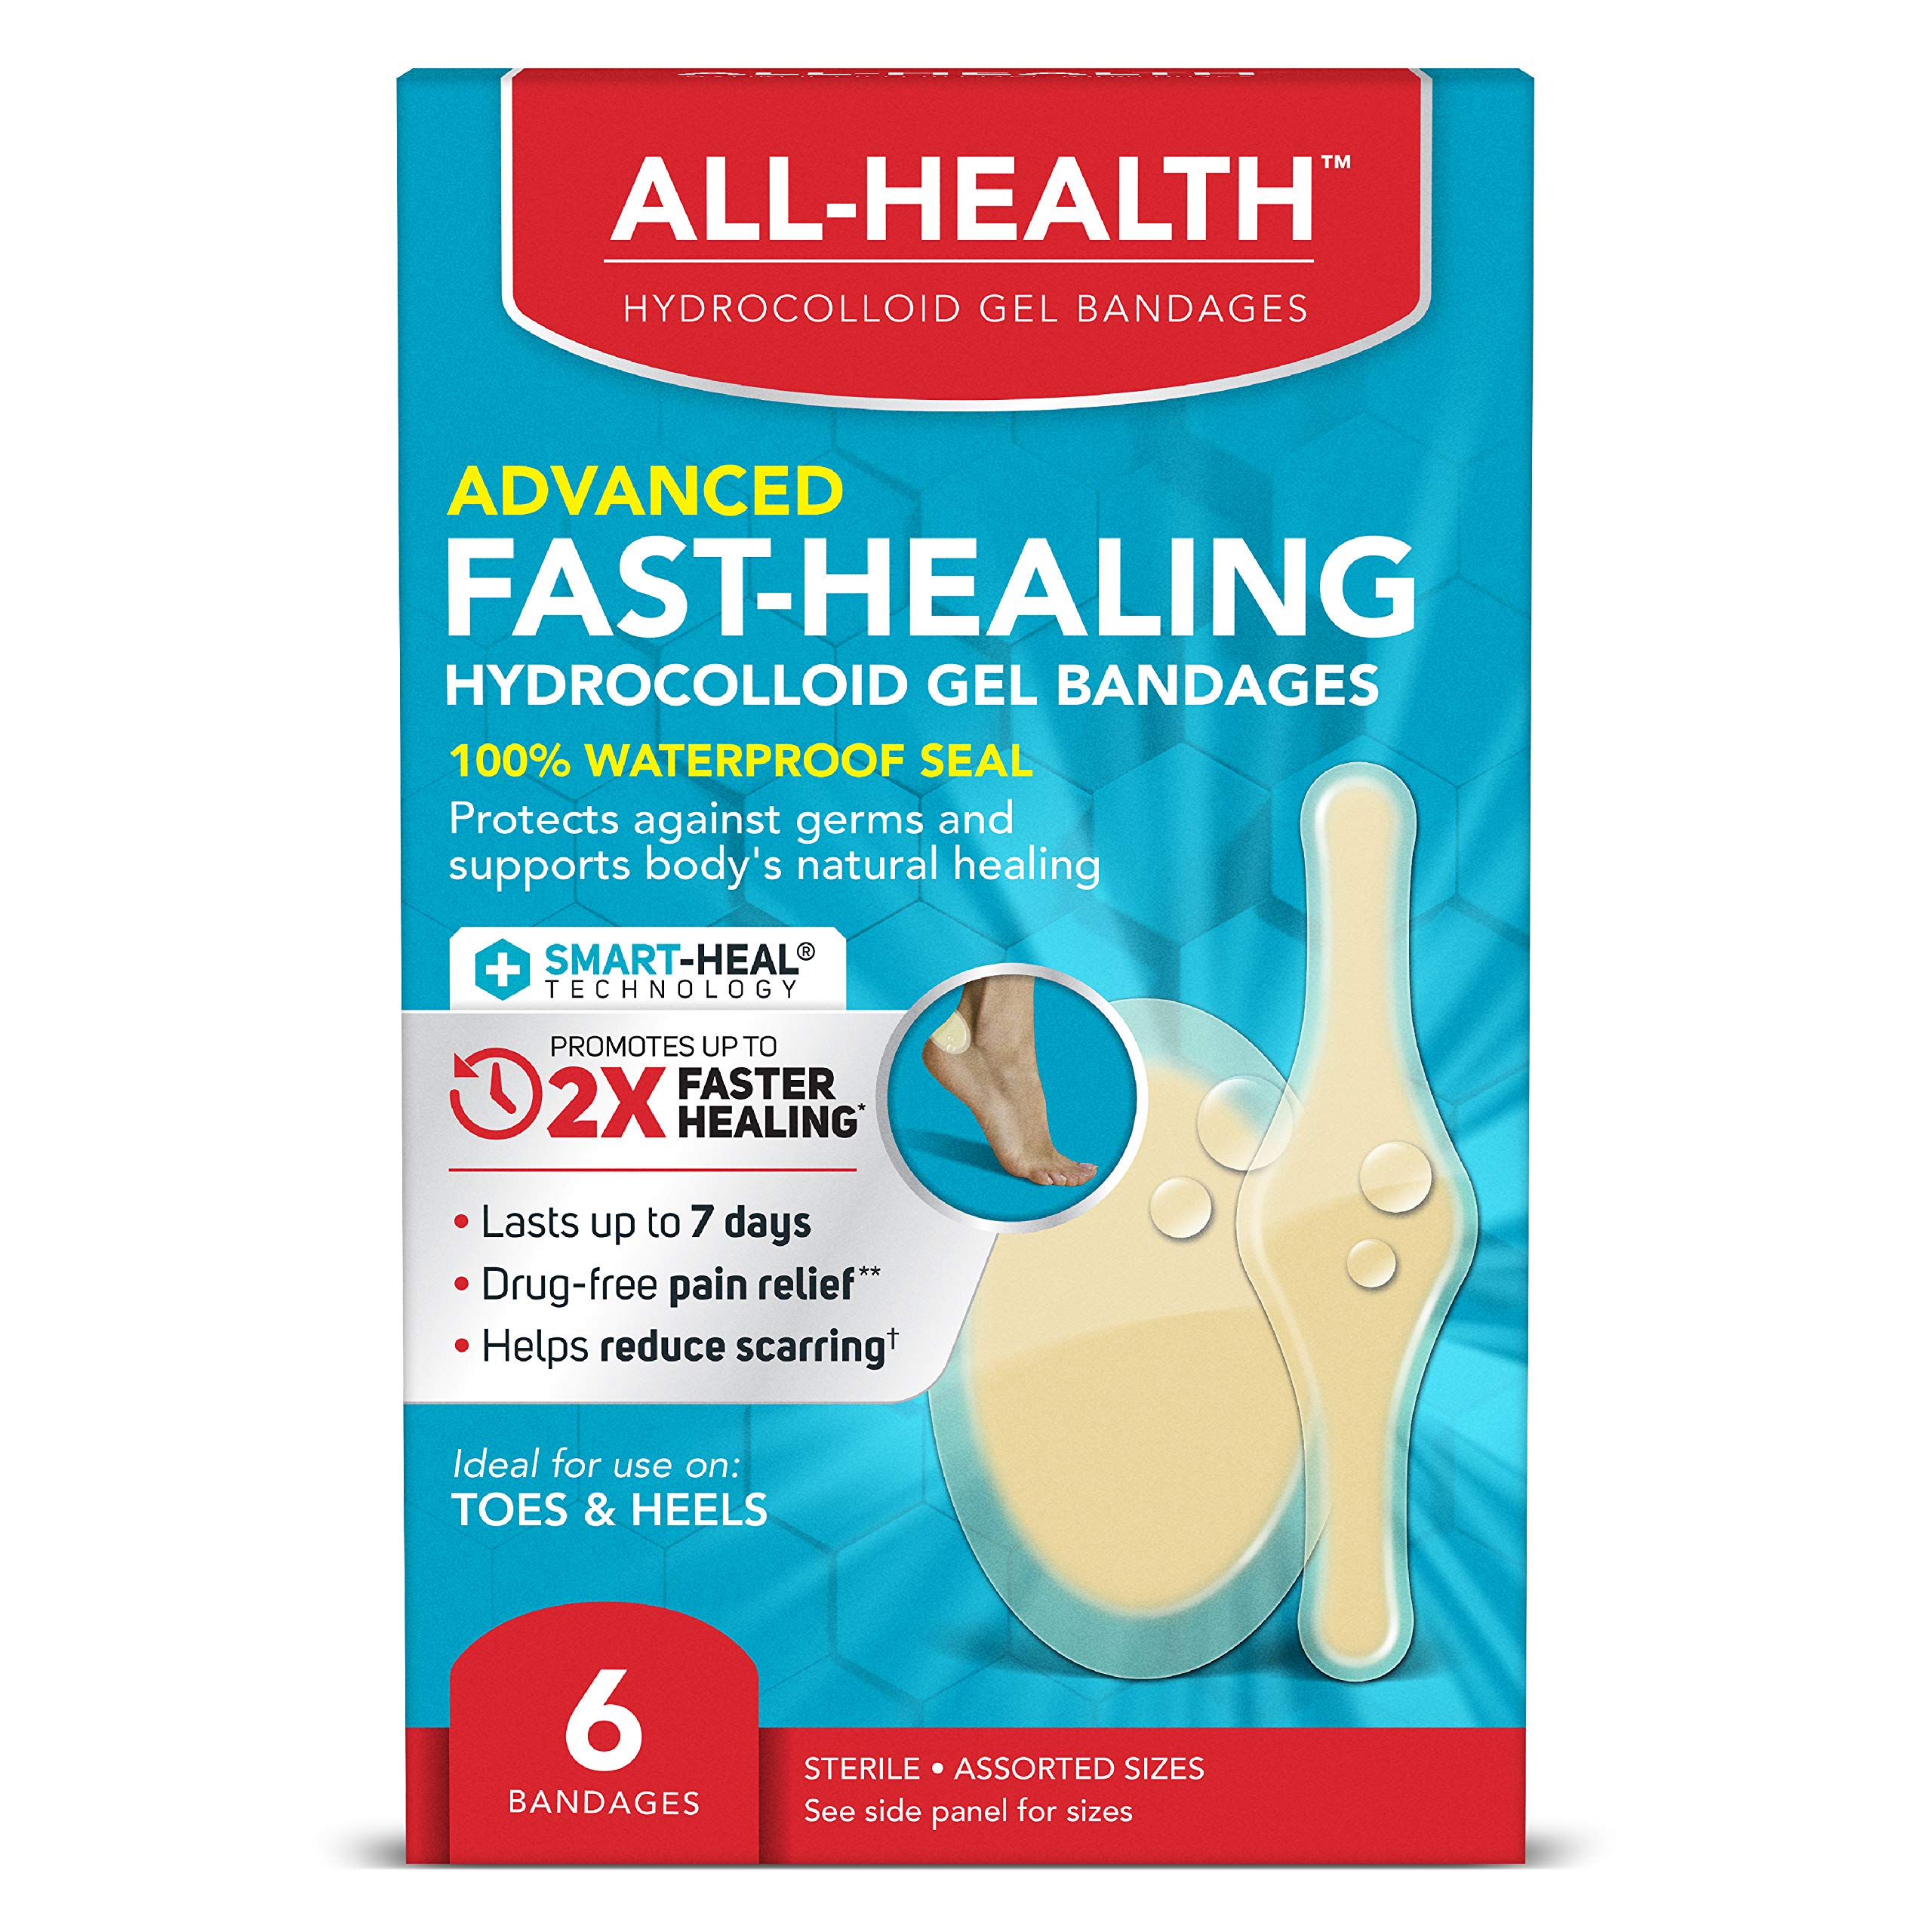 All Health Advanced Fast Healing Hydrocolloid Gel Bandages, Assorted Sizes, 6 ct | 2X Faster Healing for First Aid Blisters or W